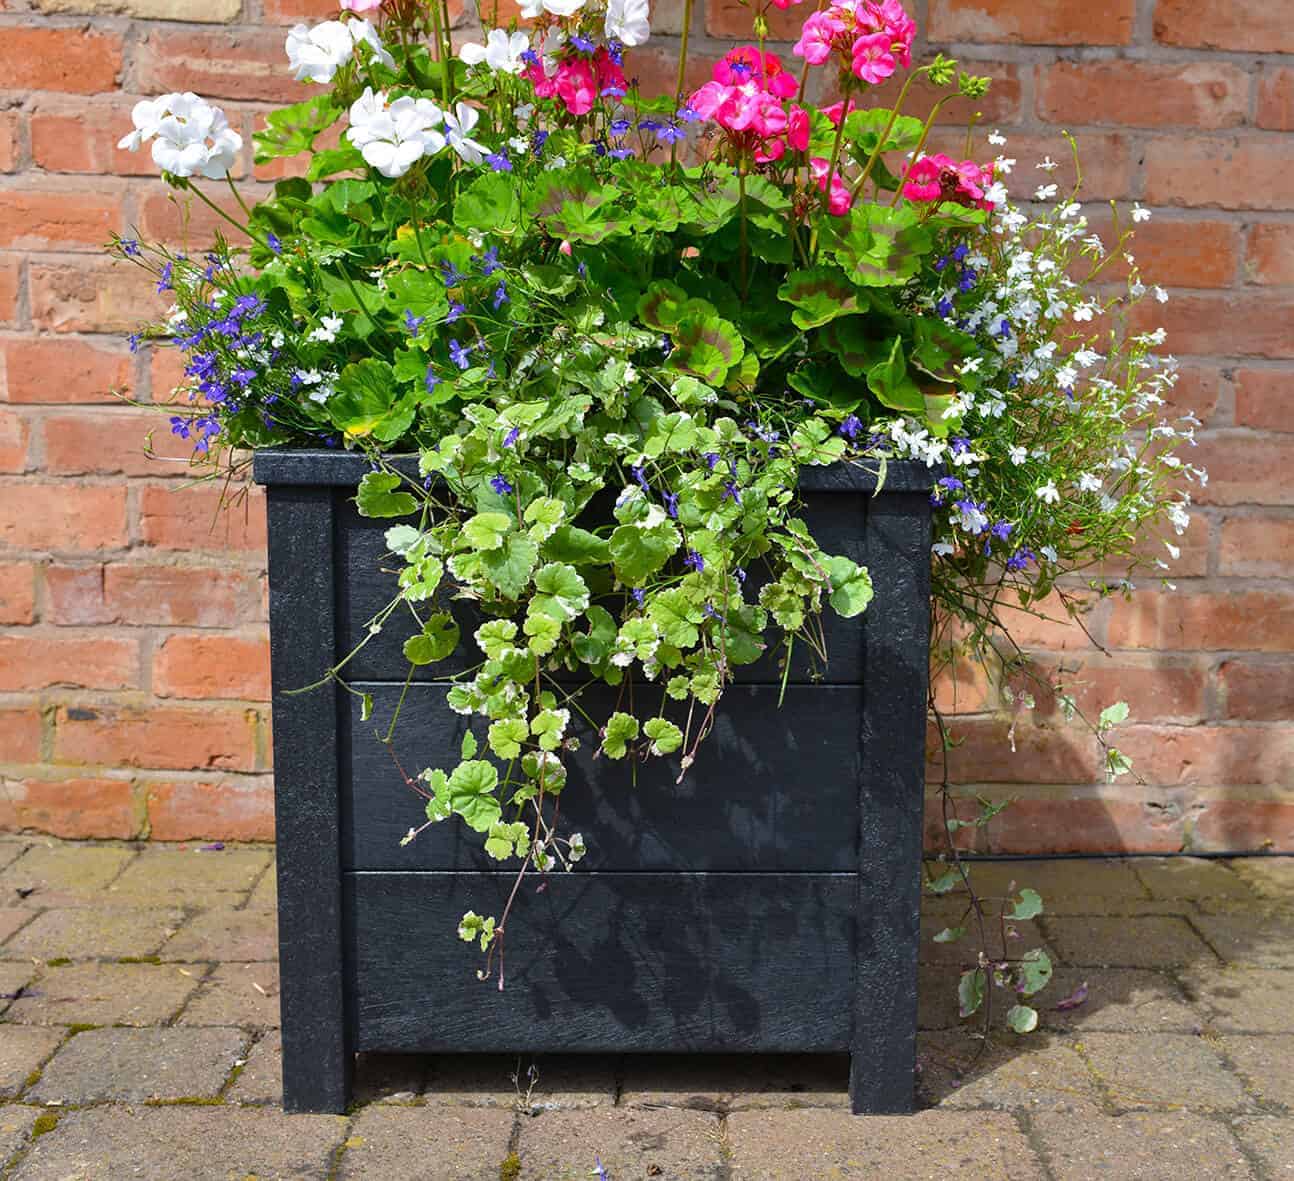 Ipstone Planter made by TDP from recycled plastic watse